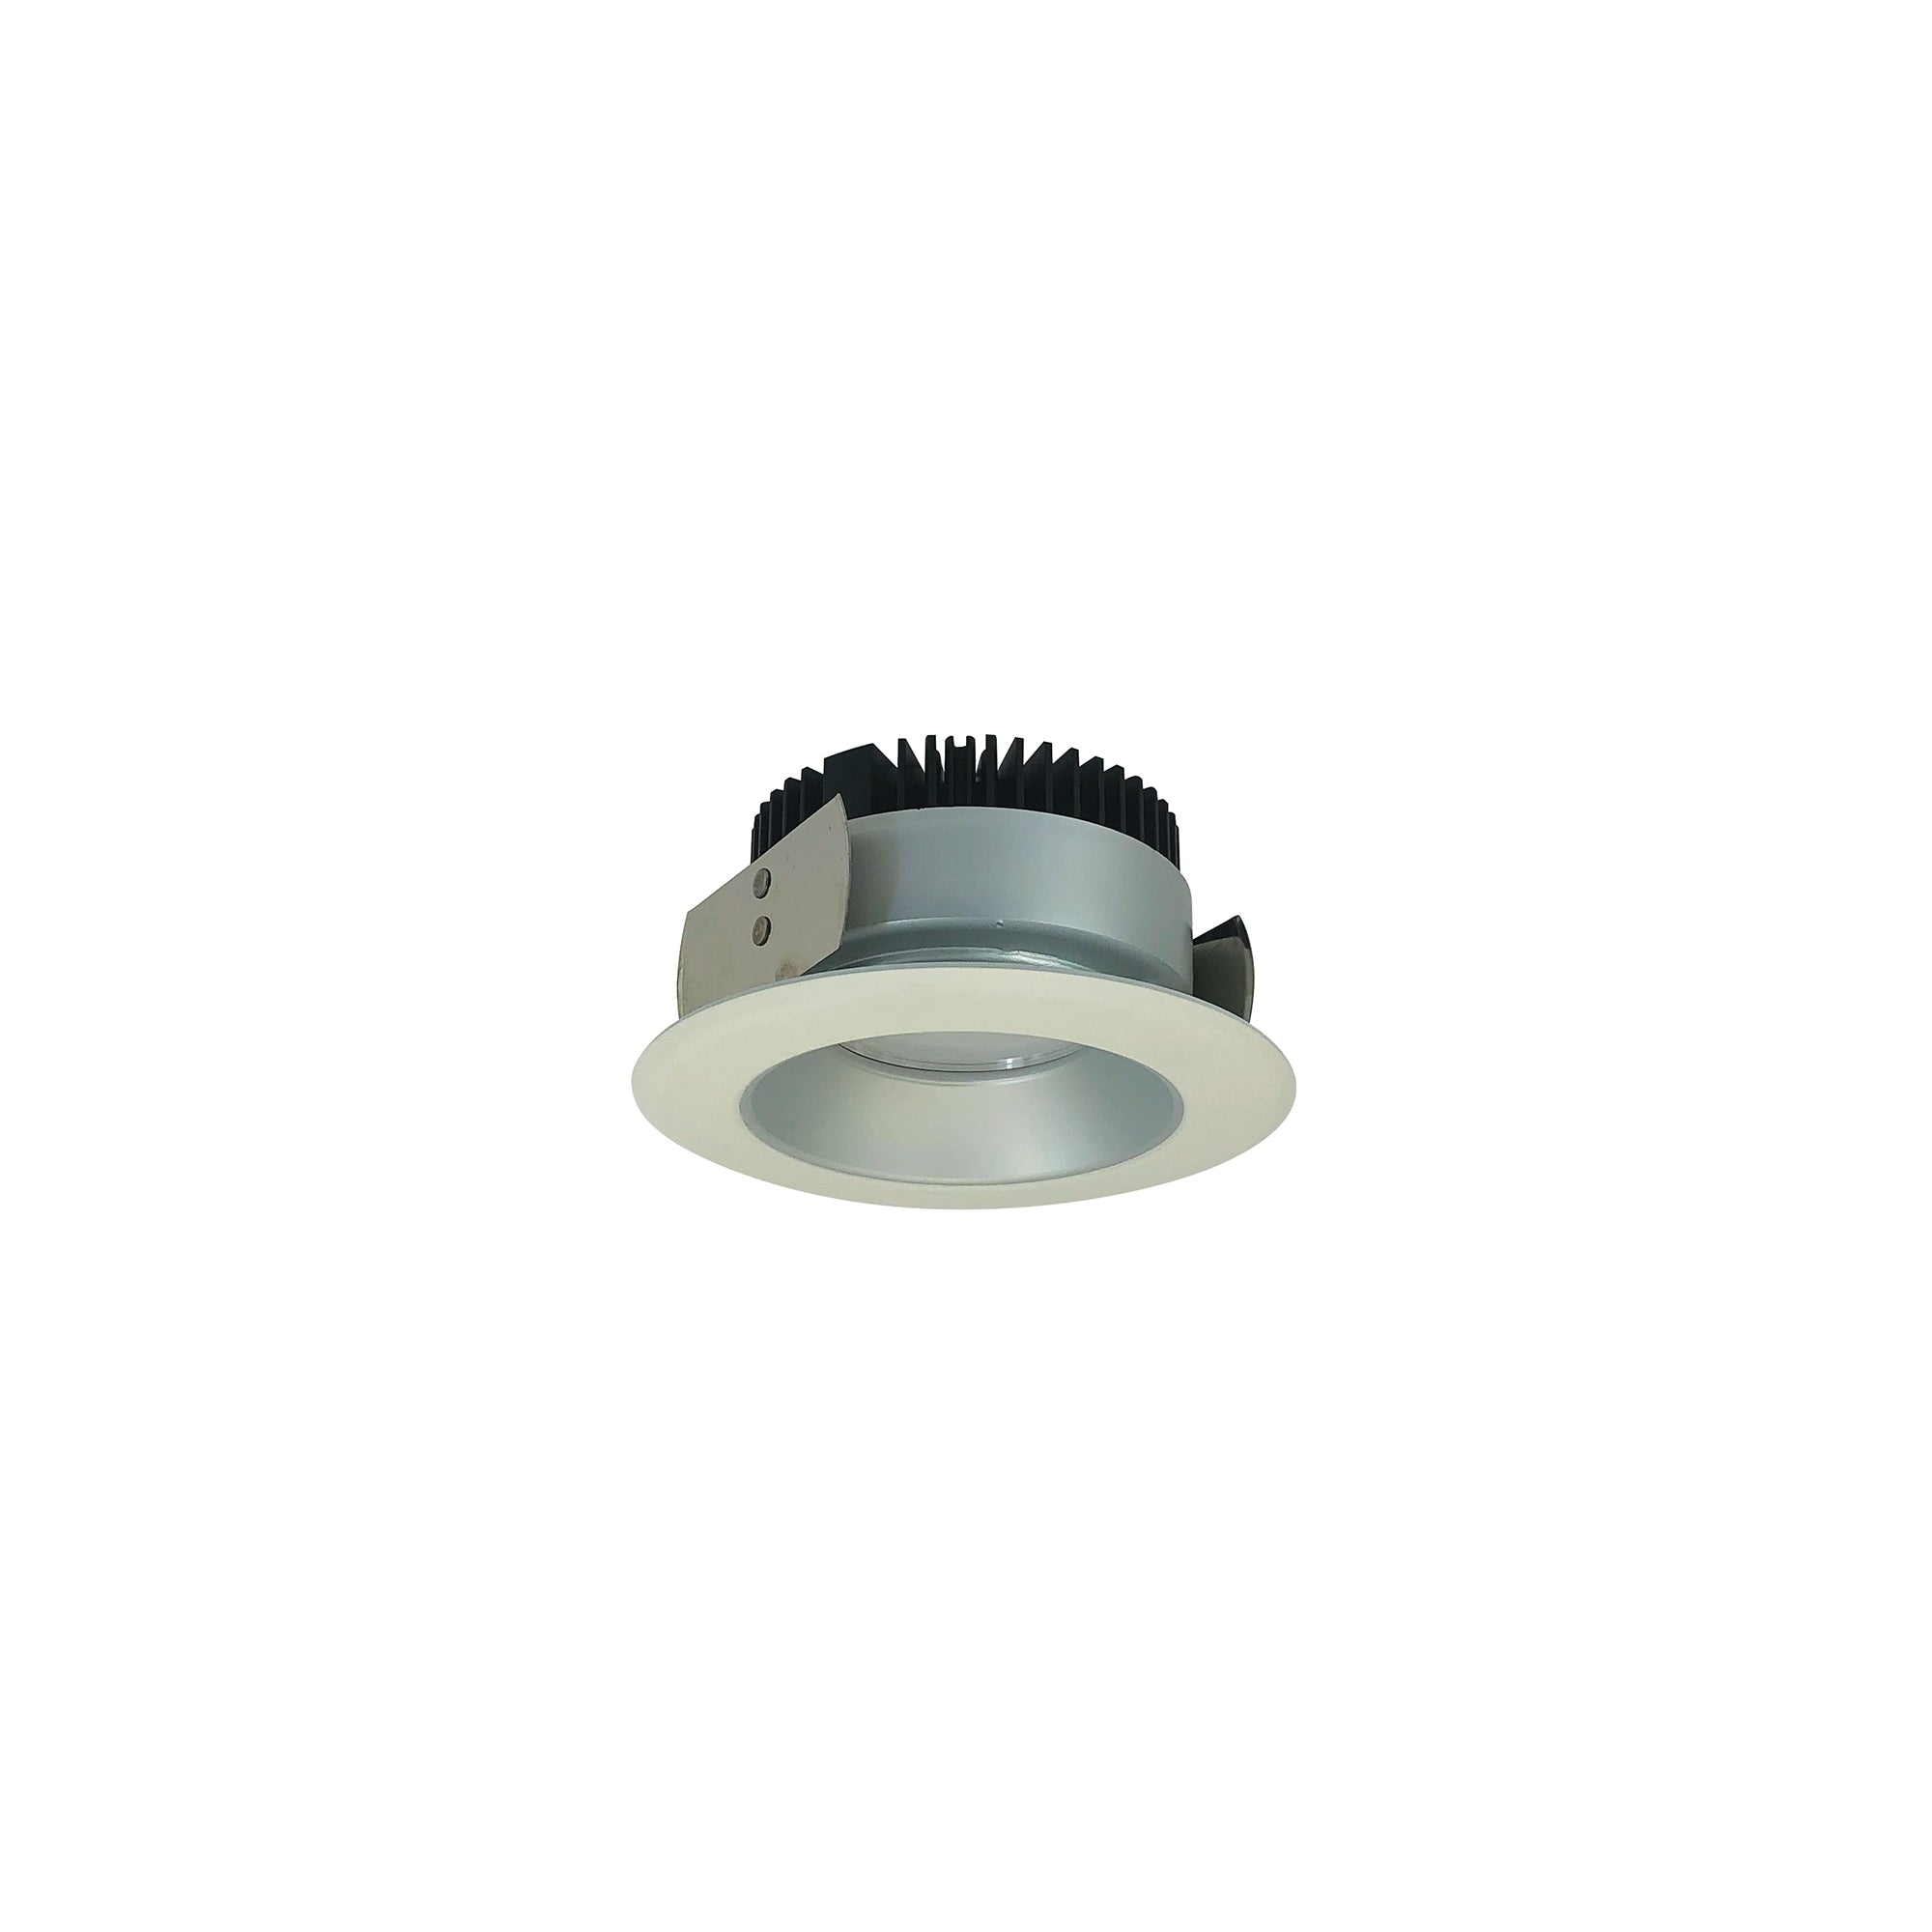 Nora Lighting NRM2-411L0940FHZW - Recessed - 4 Inch Marquise II Round Reflector, 900lm, 4000K, Flood, Haze/White